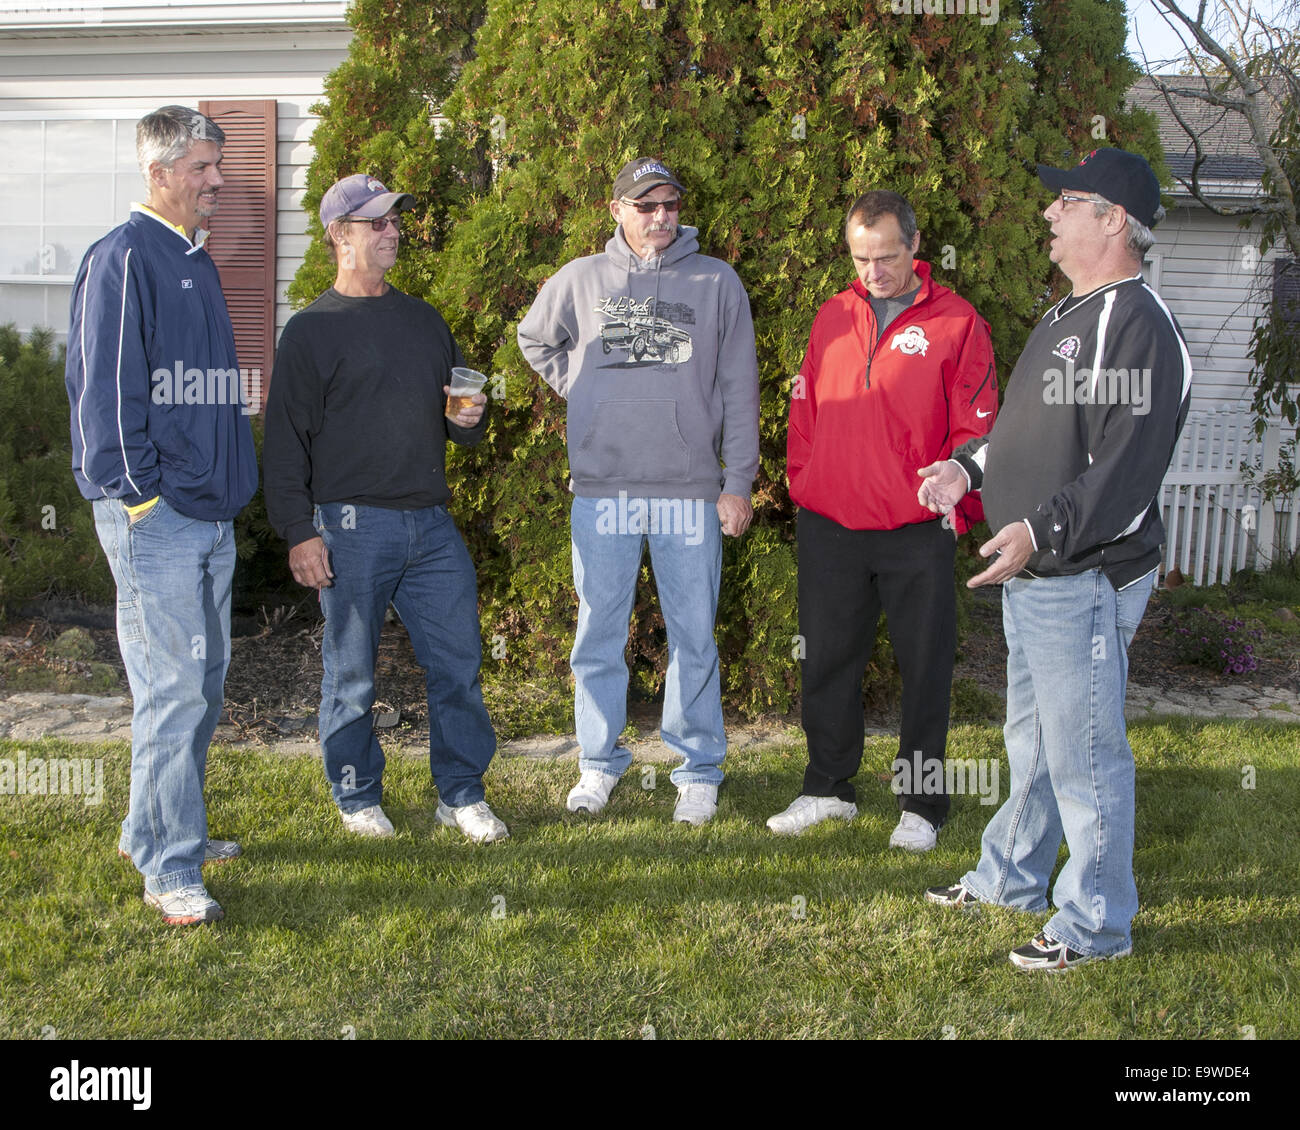 5-men-are-standing-outside-in-a-half-circle-one-is-talking-and-the-E9WDE4.jpg